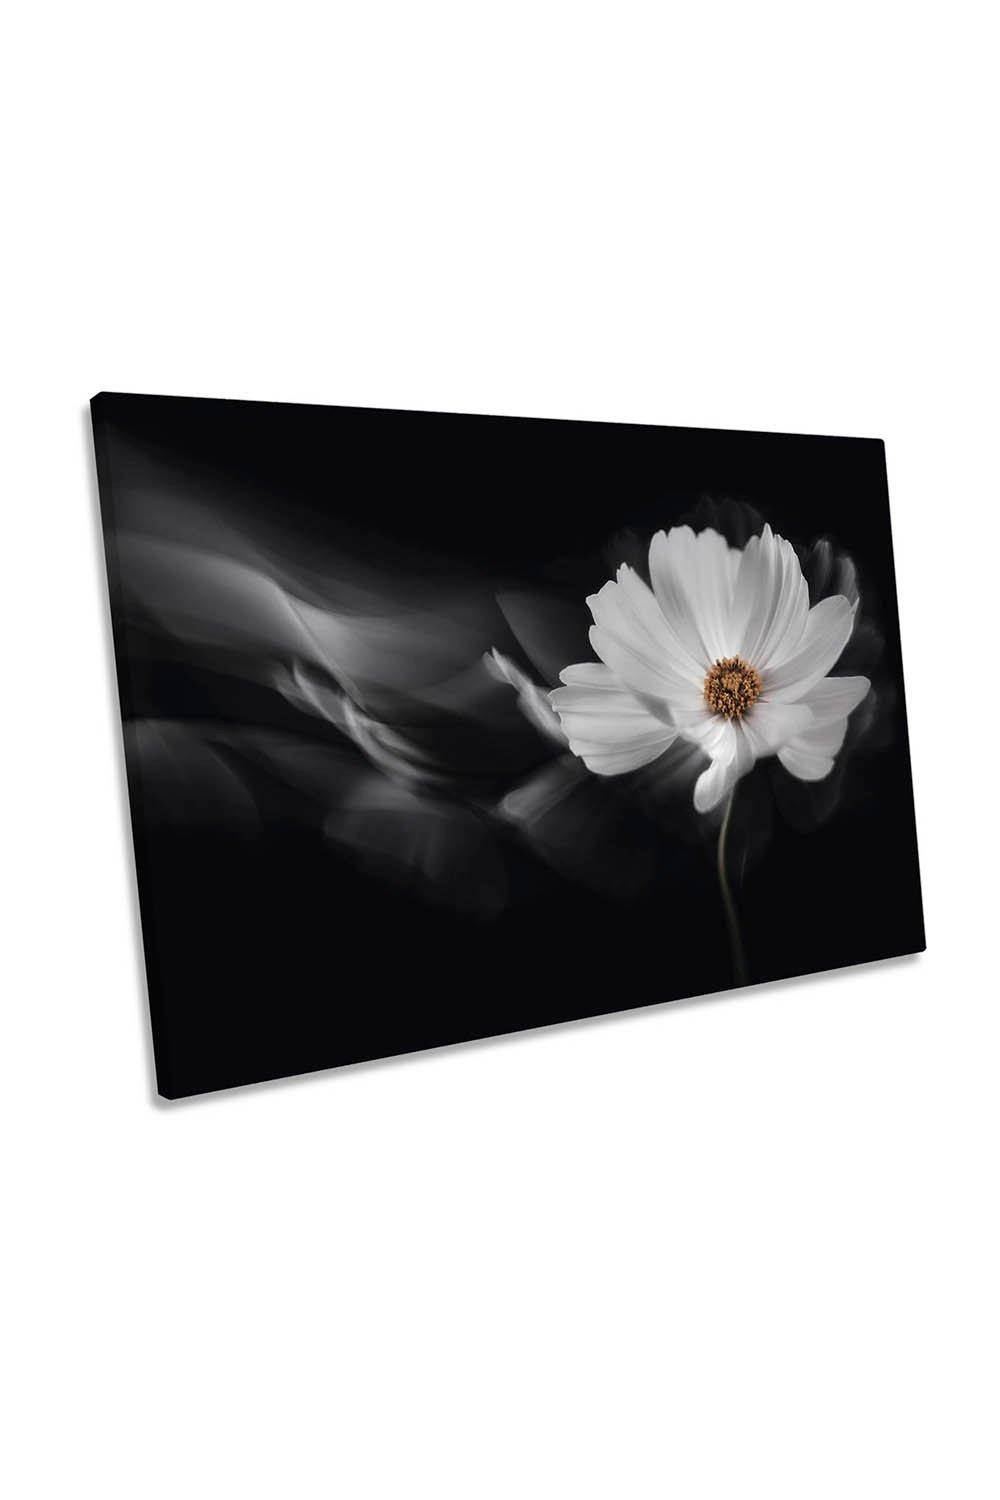 Symphony White Flower Black Background Canvas Wall Art Picture Print